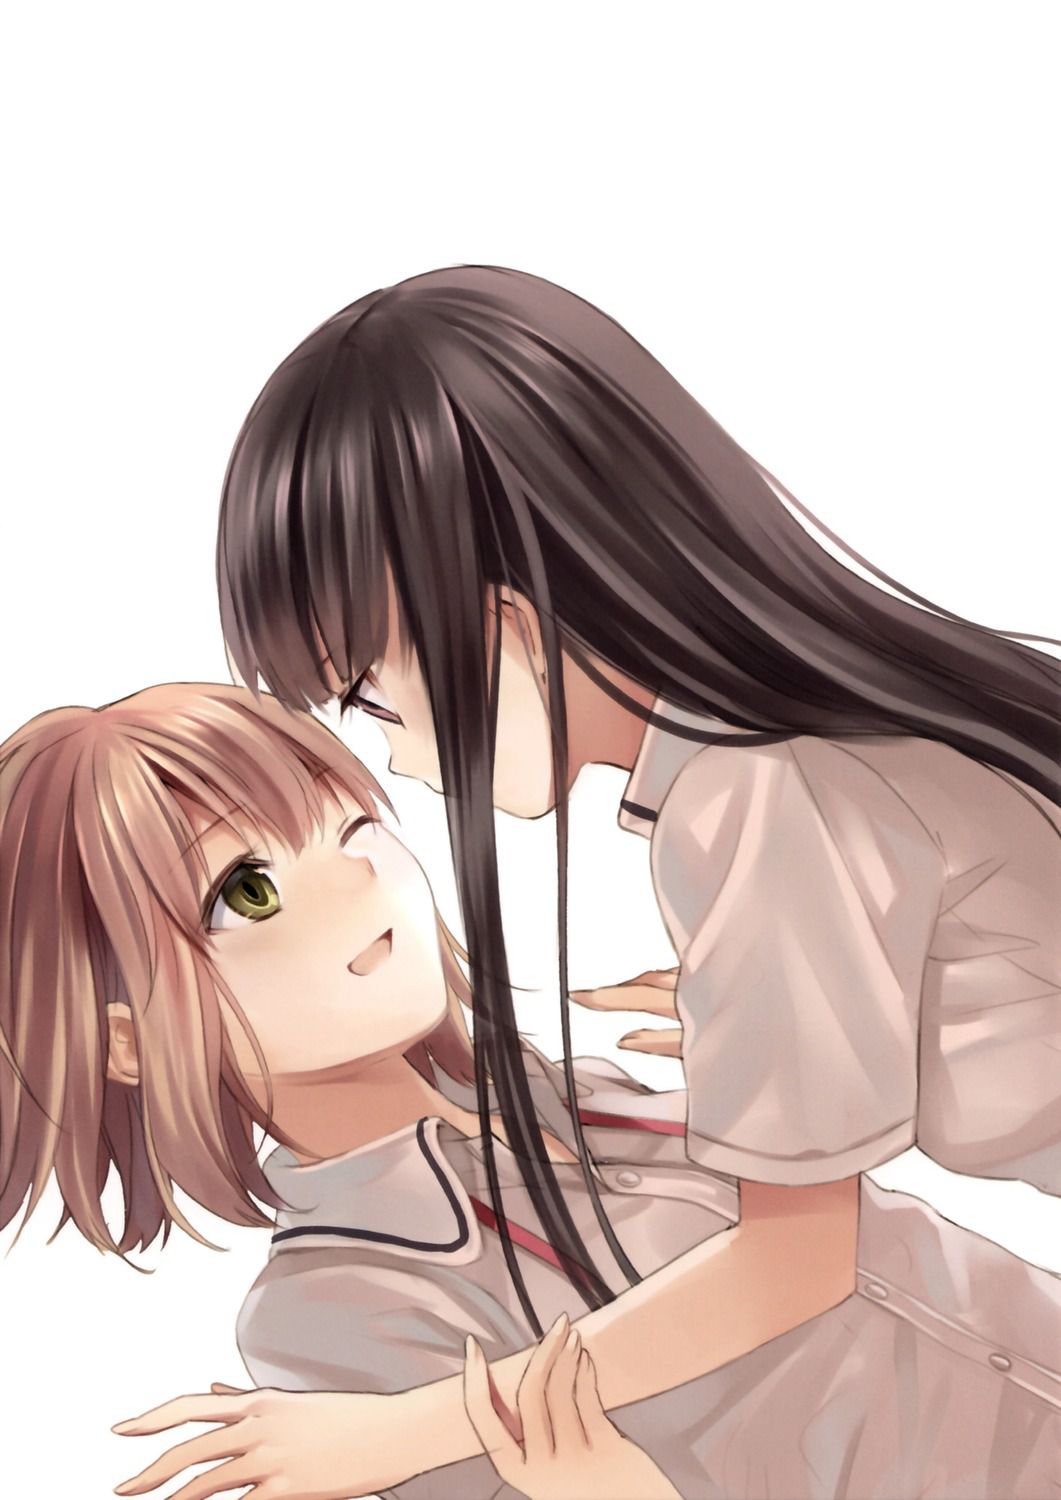 Yuri and Lesbian secondary image wwww to be naughty in girls each other 4 17